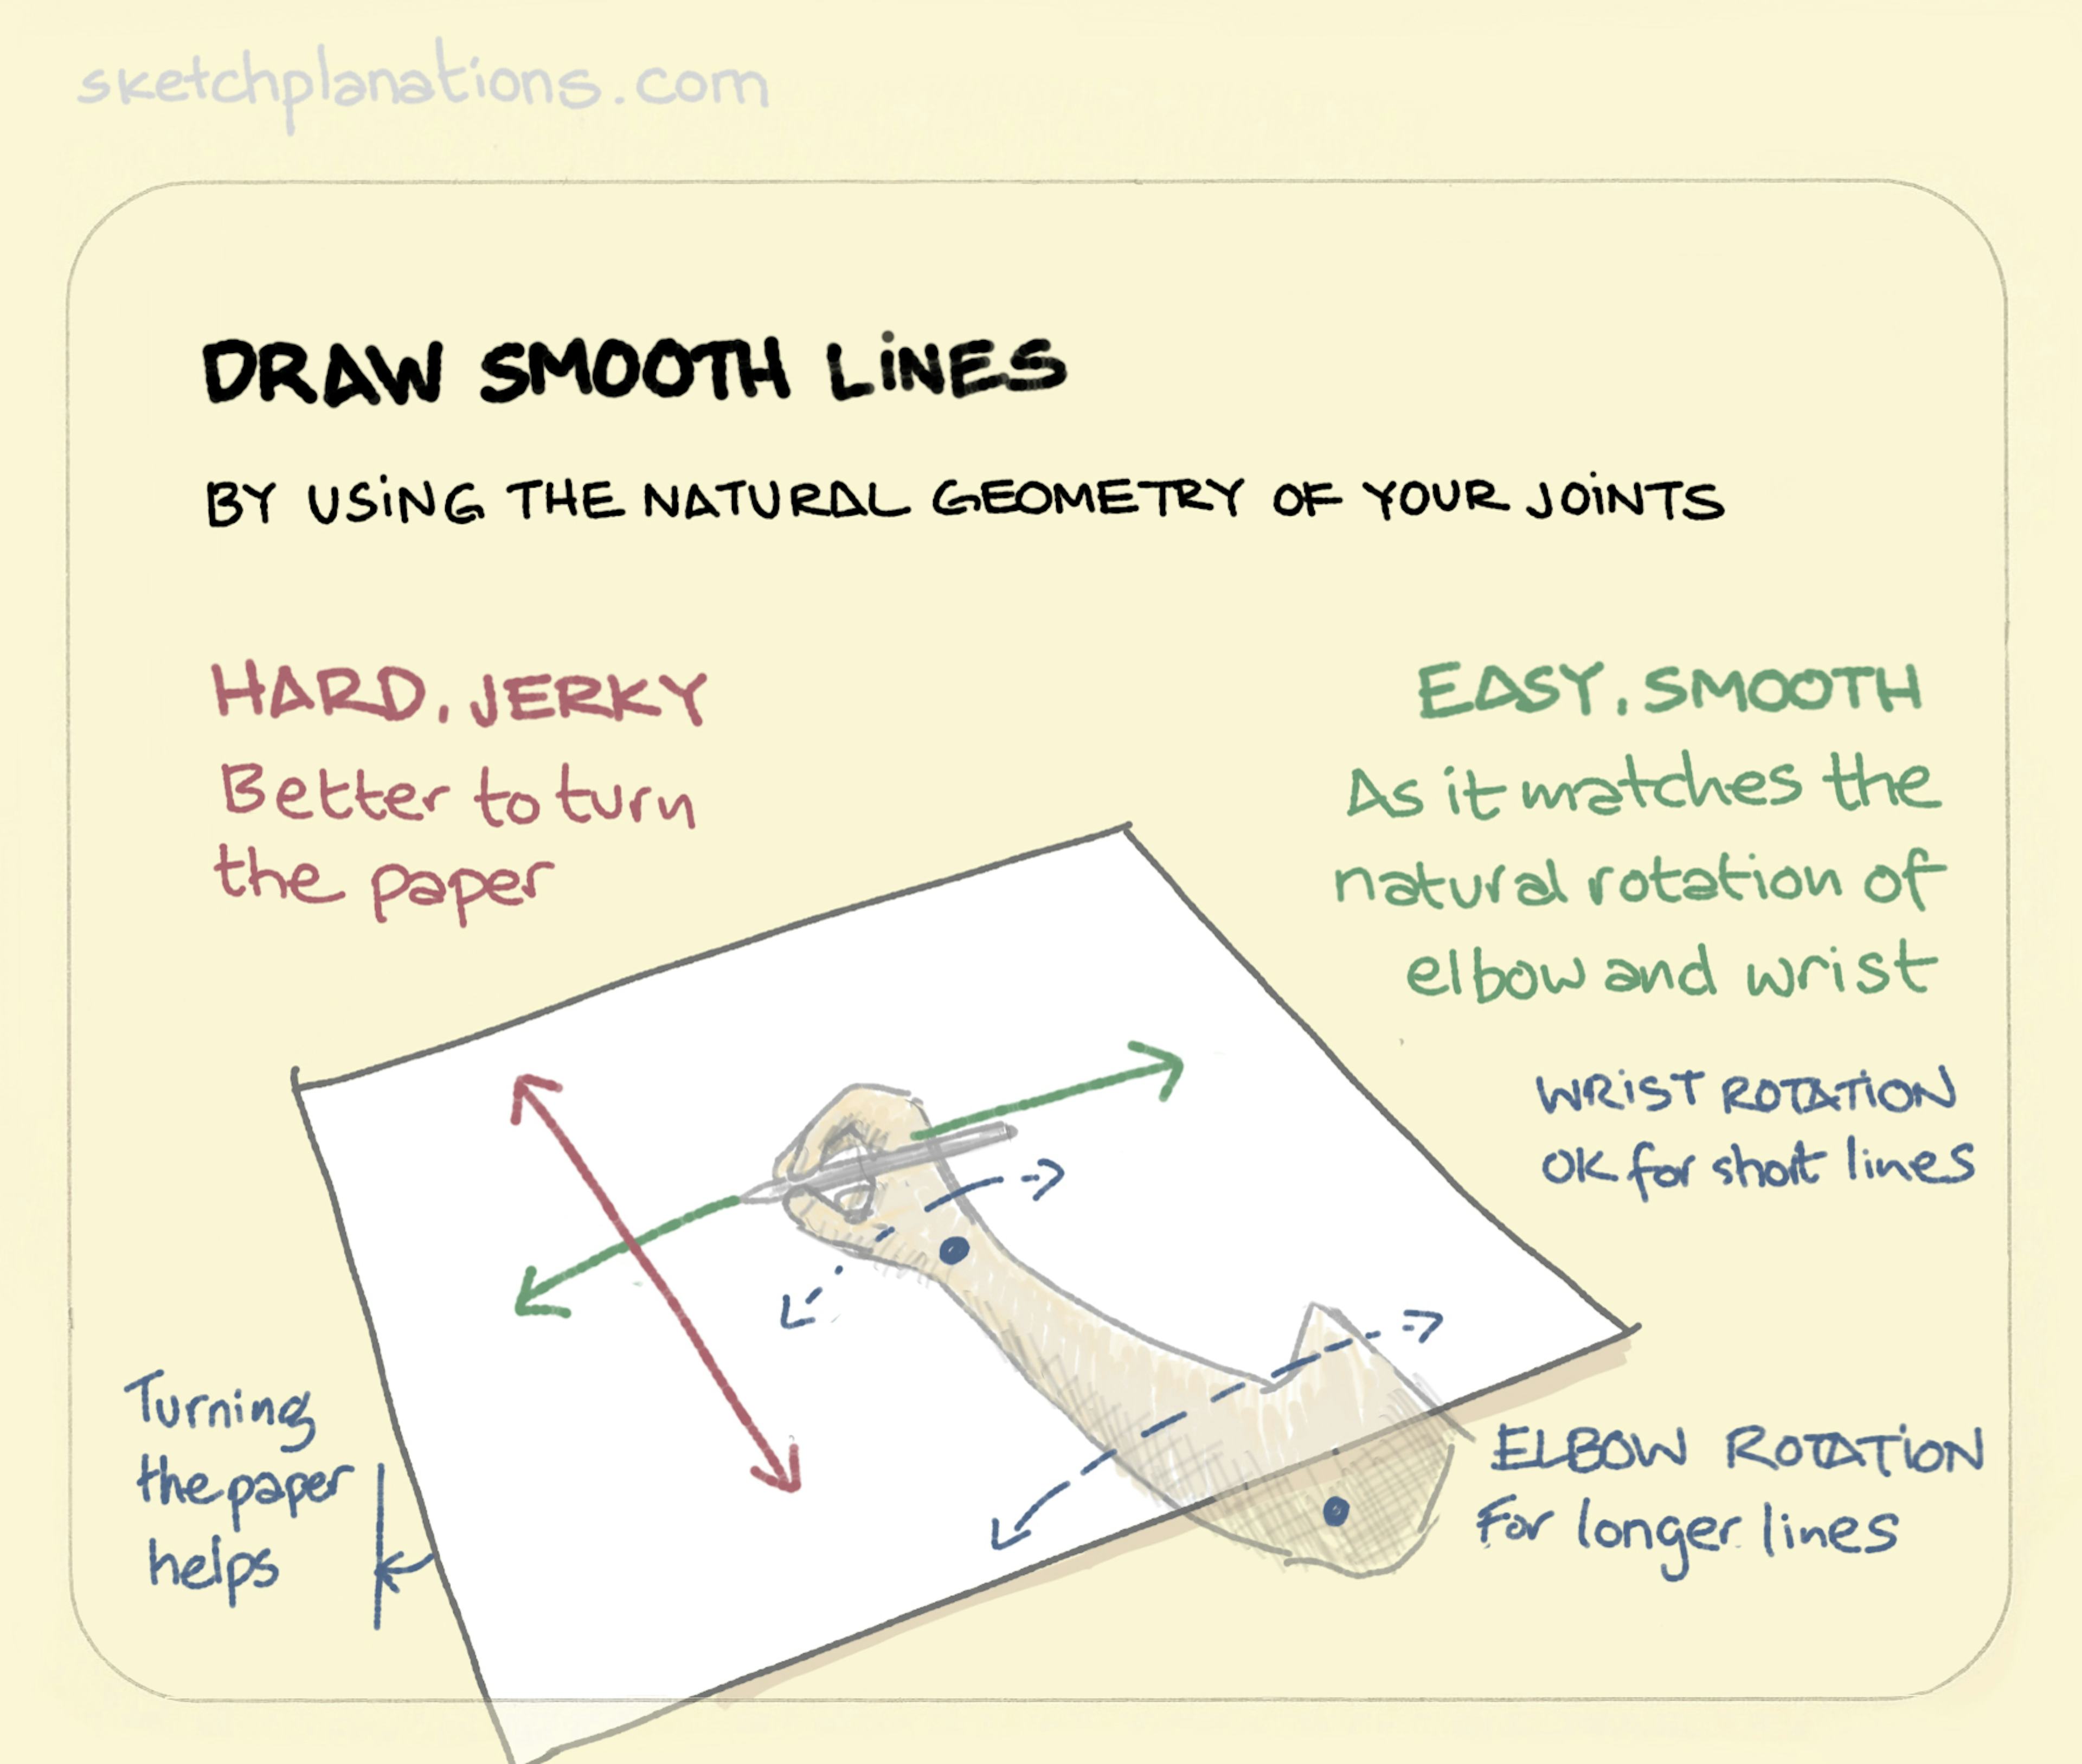 Draw smooth lines illustration: on a large piece of paper a hand holding a pen draws lines. Short straight lines are drawn through rotation of the wrist. Longer straight lines are drawn through rotation at the elbow. 